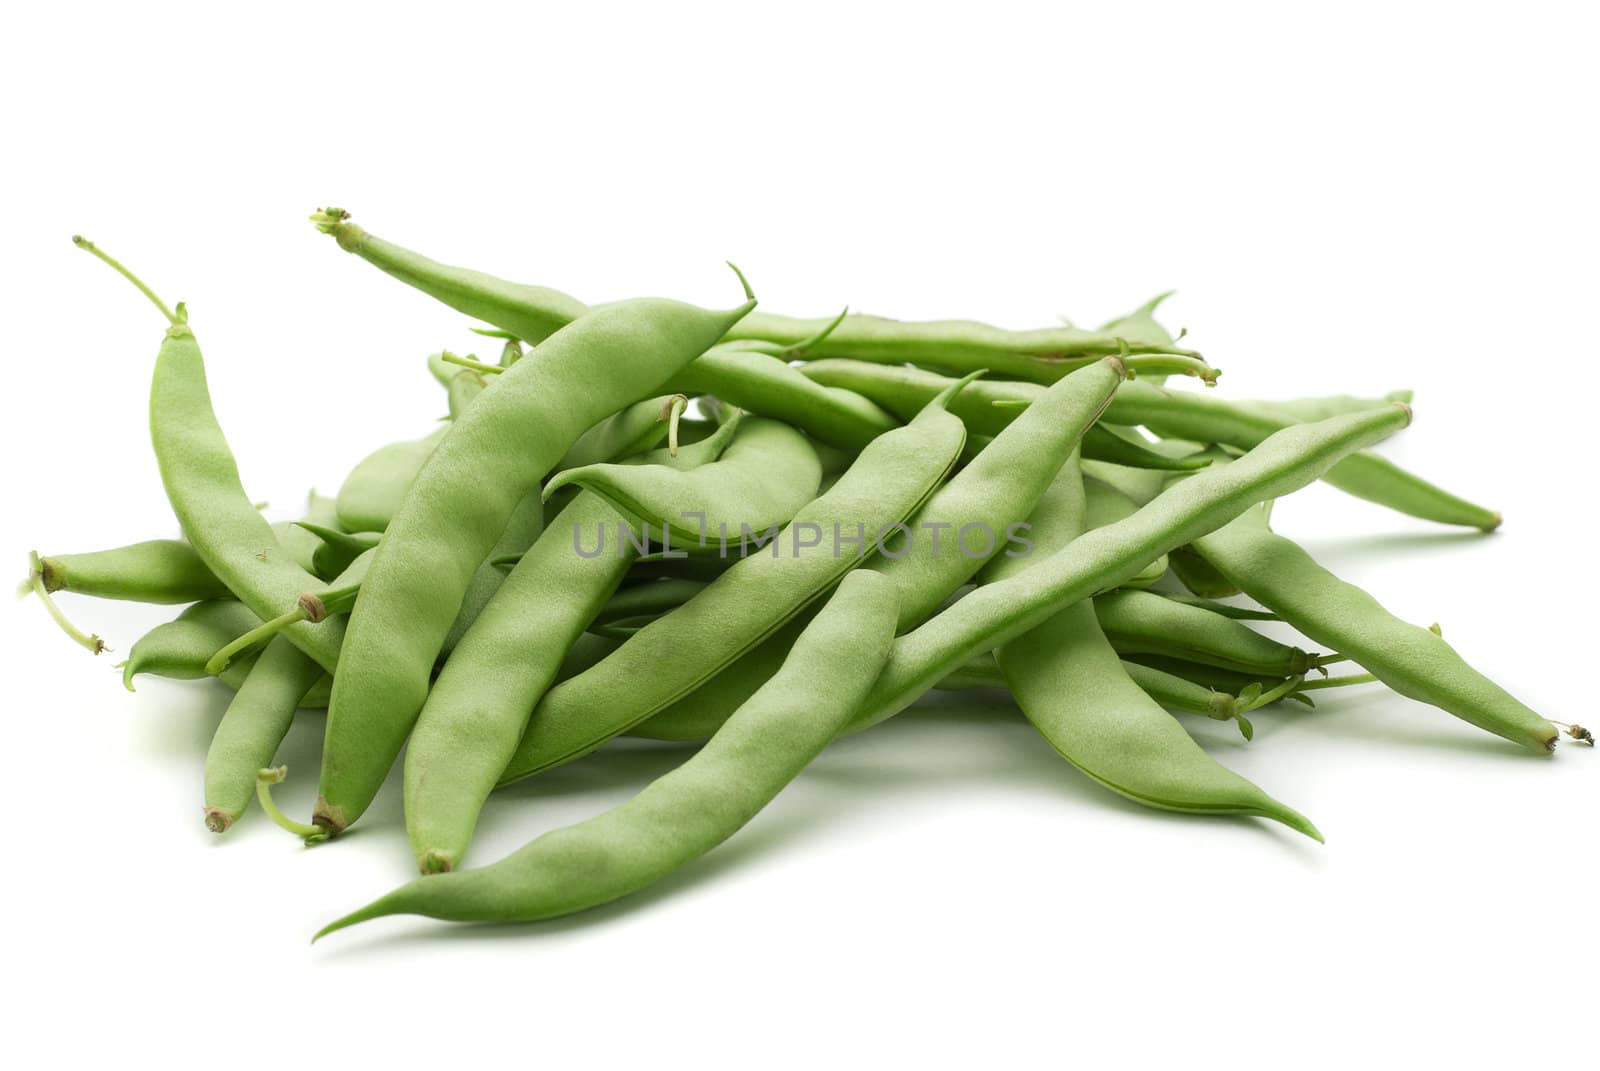 Bunch of fresh green beans isolated on white background